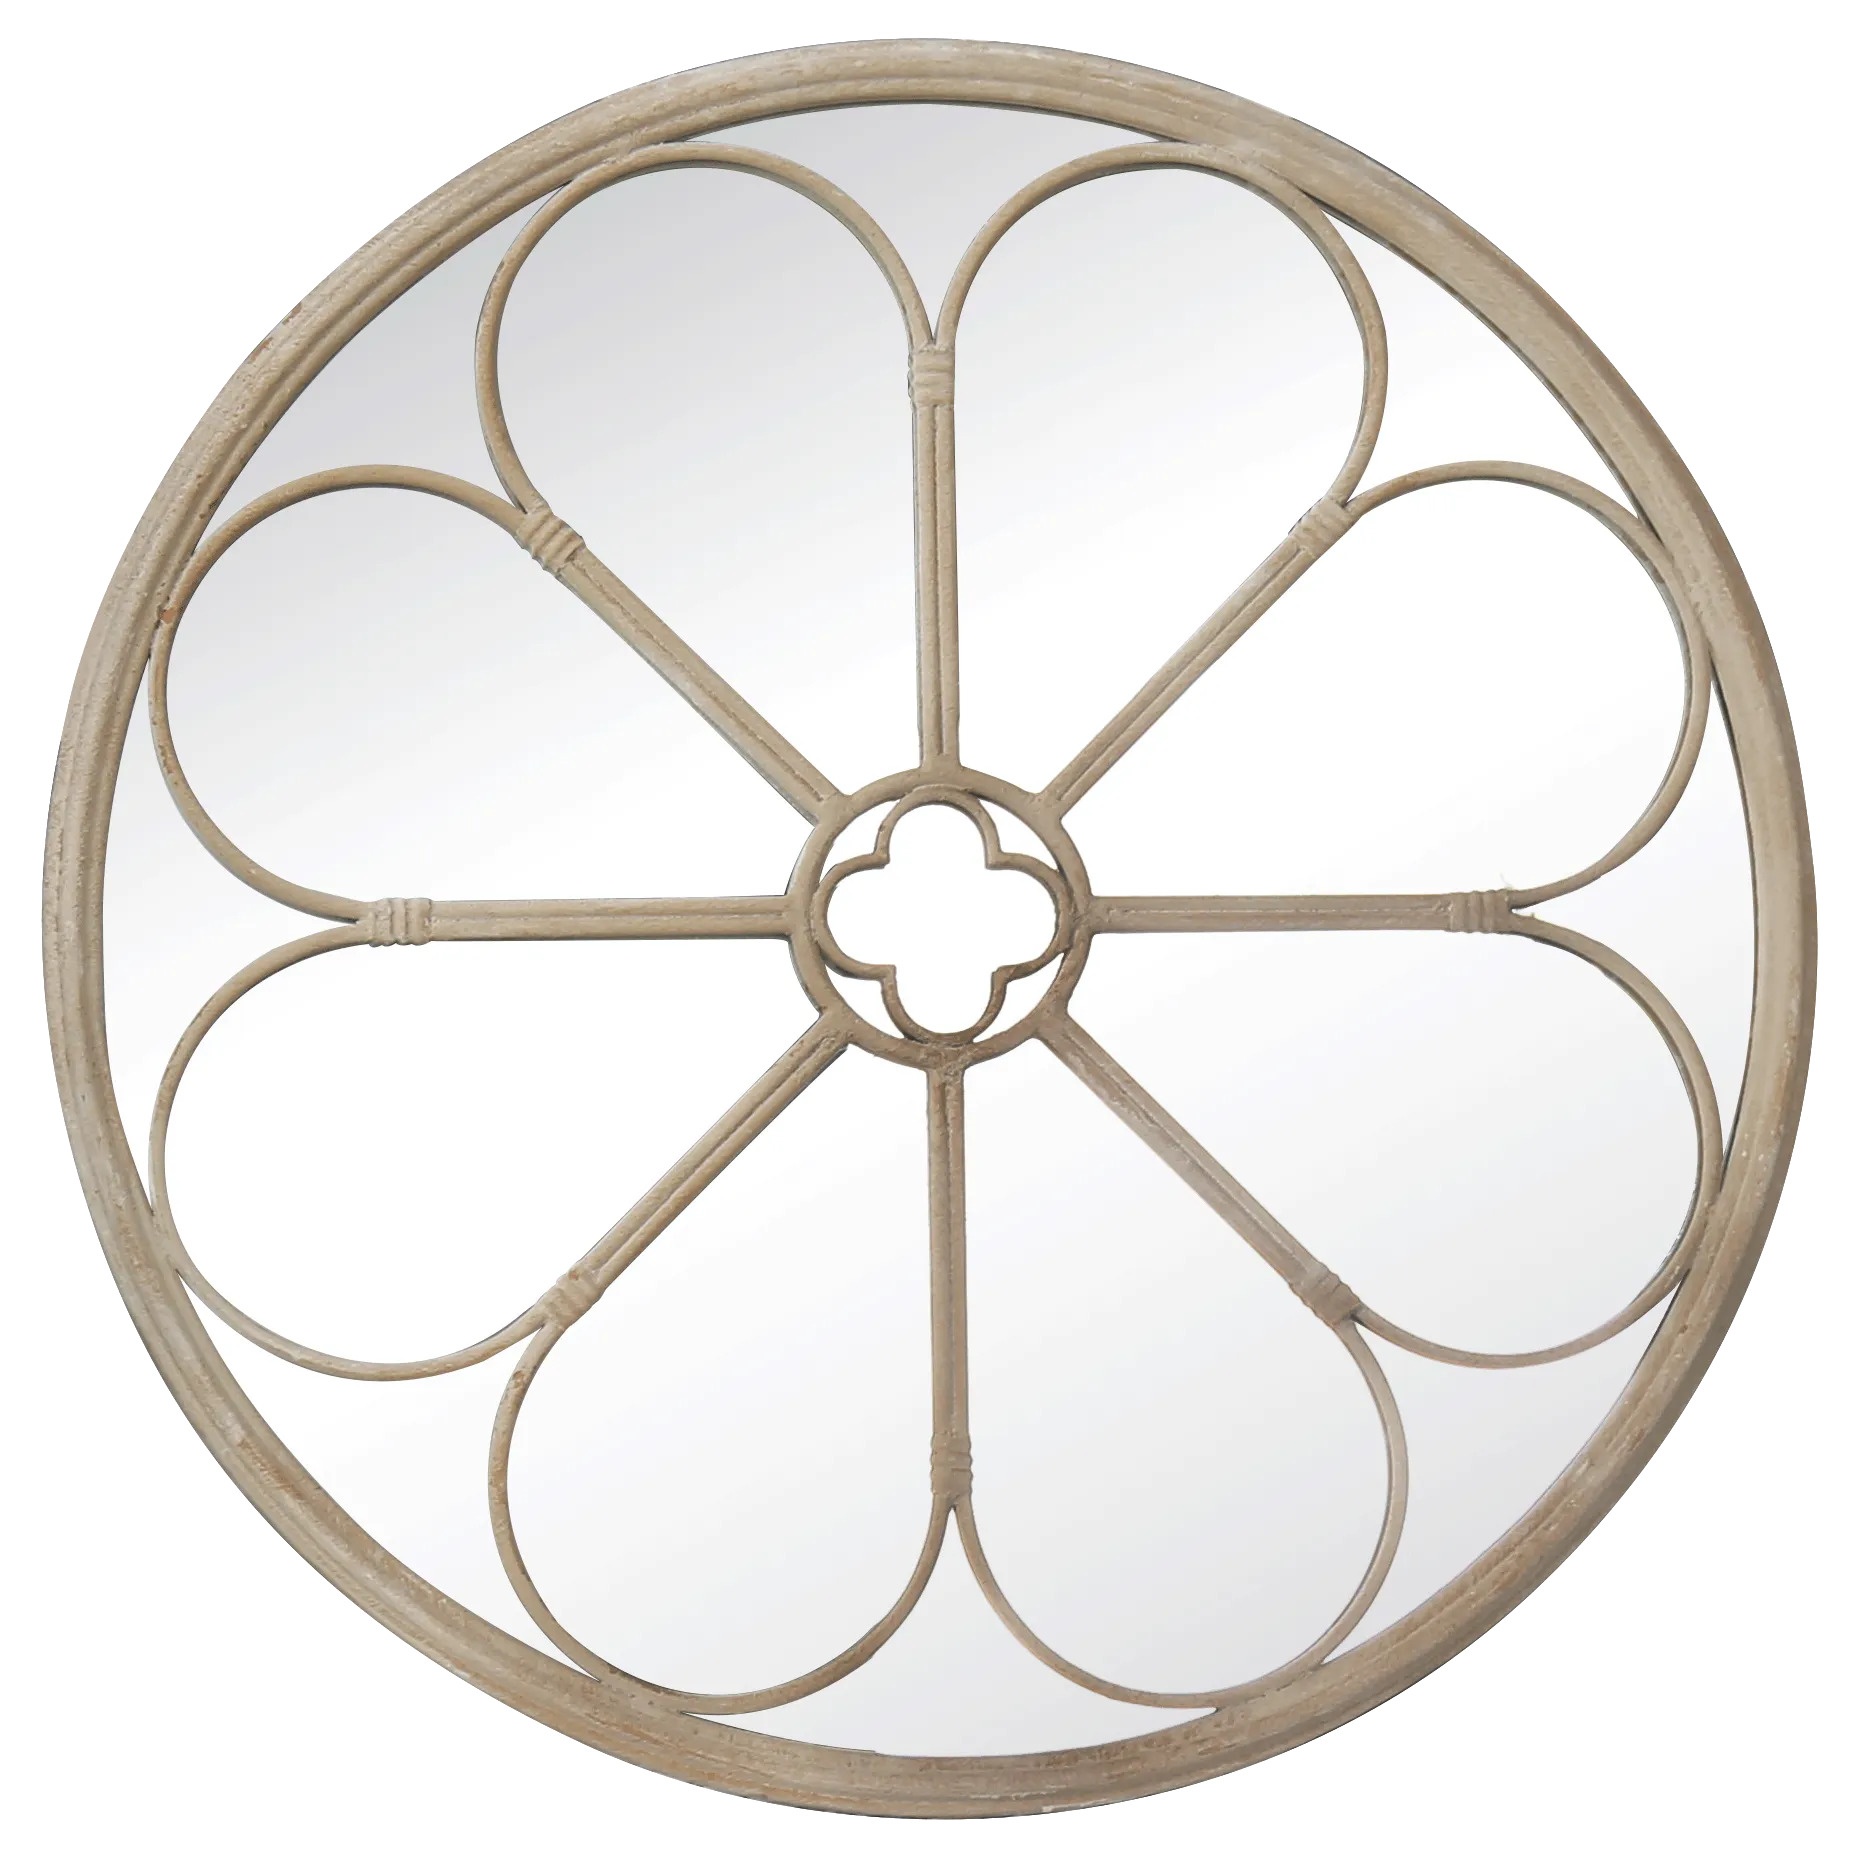 Round Glass Mirrors Metal Frame Wall Window Mirror PL08-39541 Featured Image